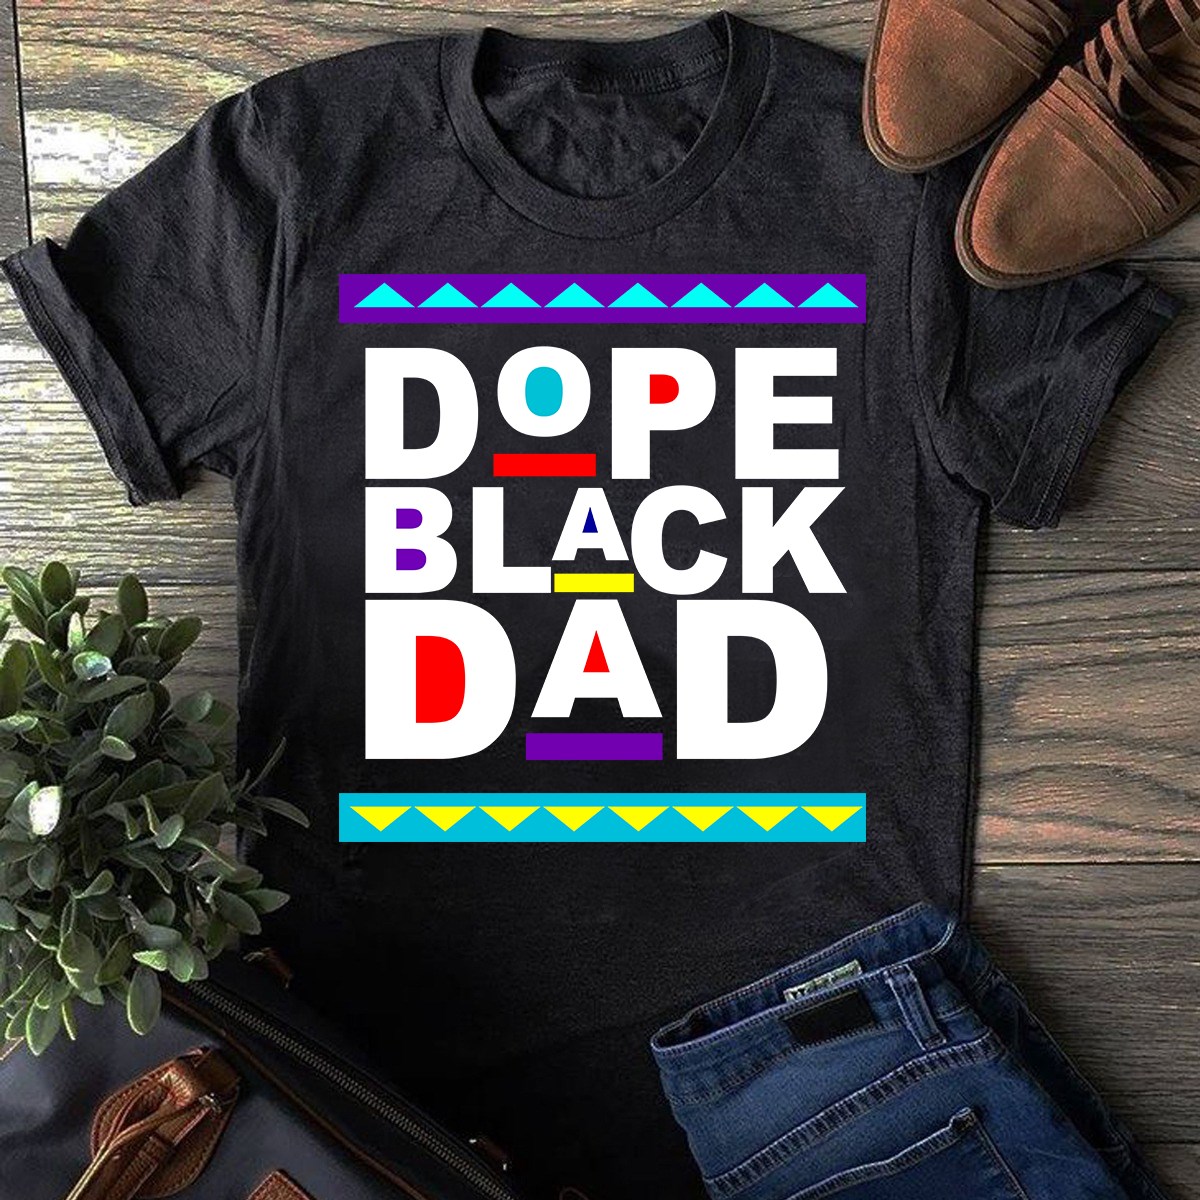 Dope black dad - Father's day gift